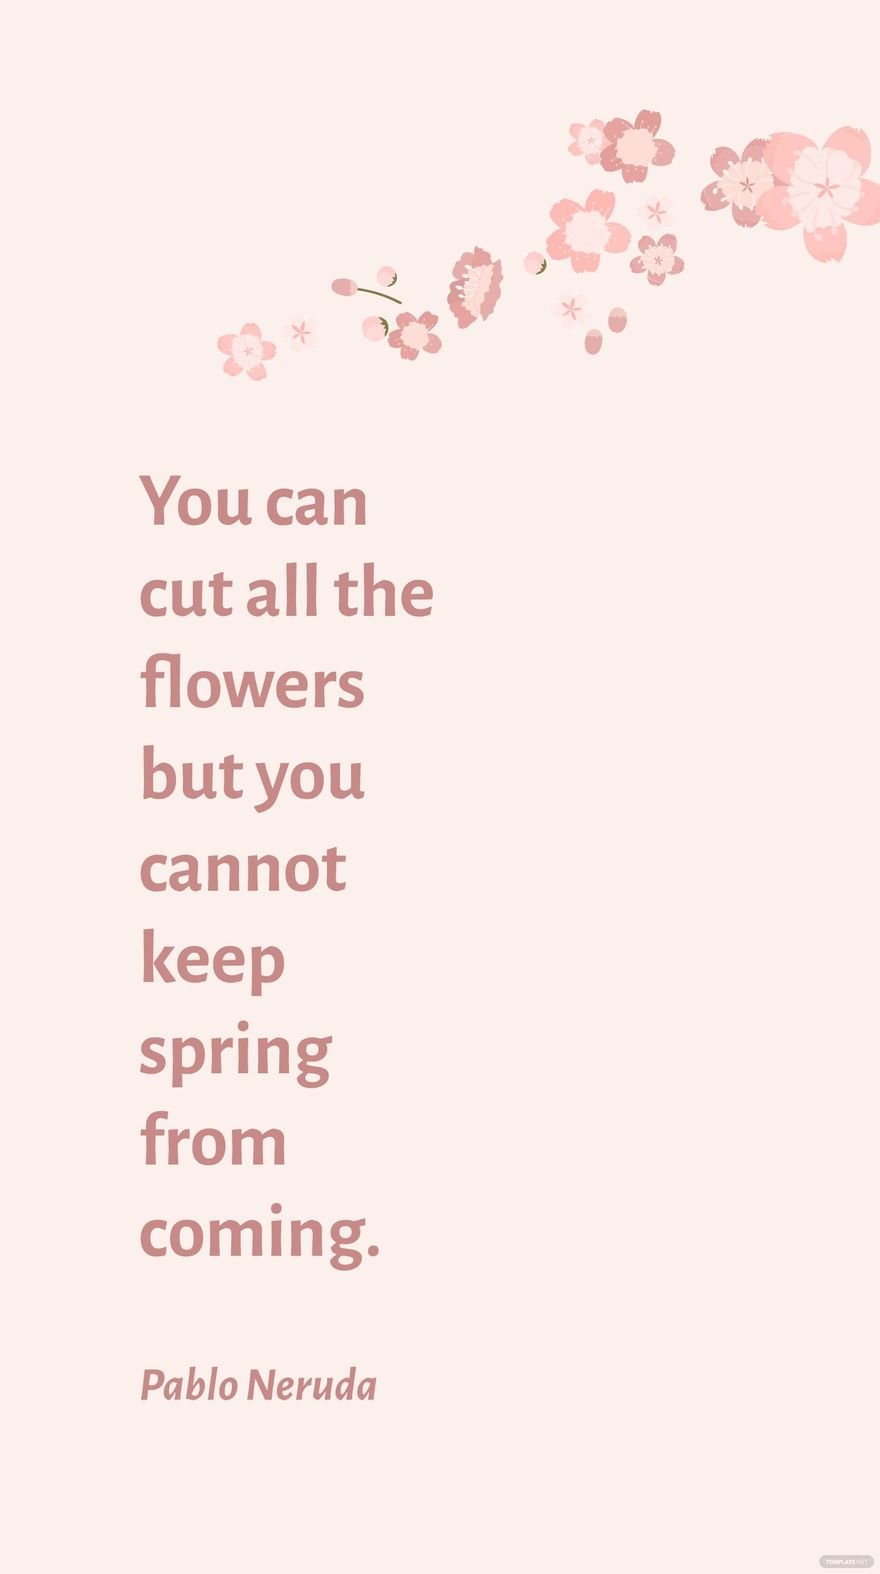 Free Pablo Neruda - You can cut all the flowers but you cannot keep spring from coming. in JPG